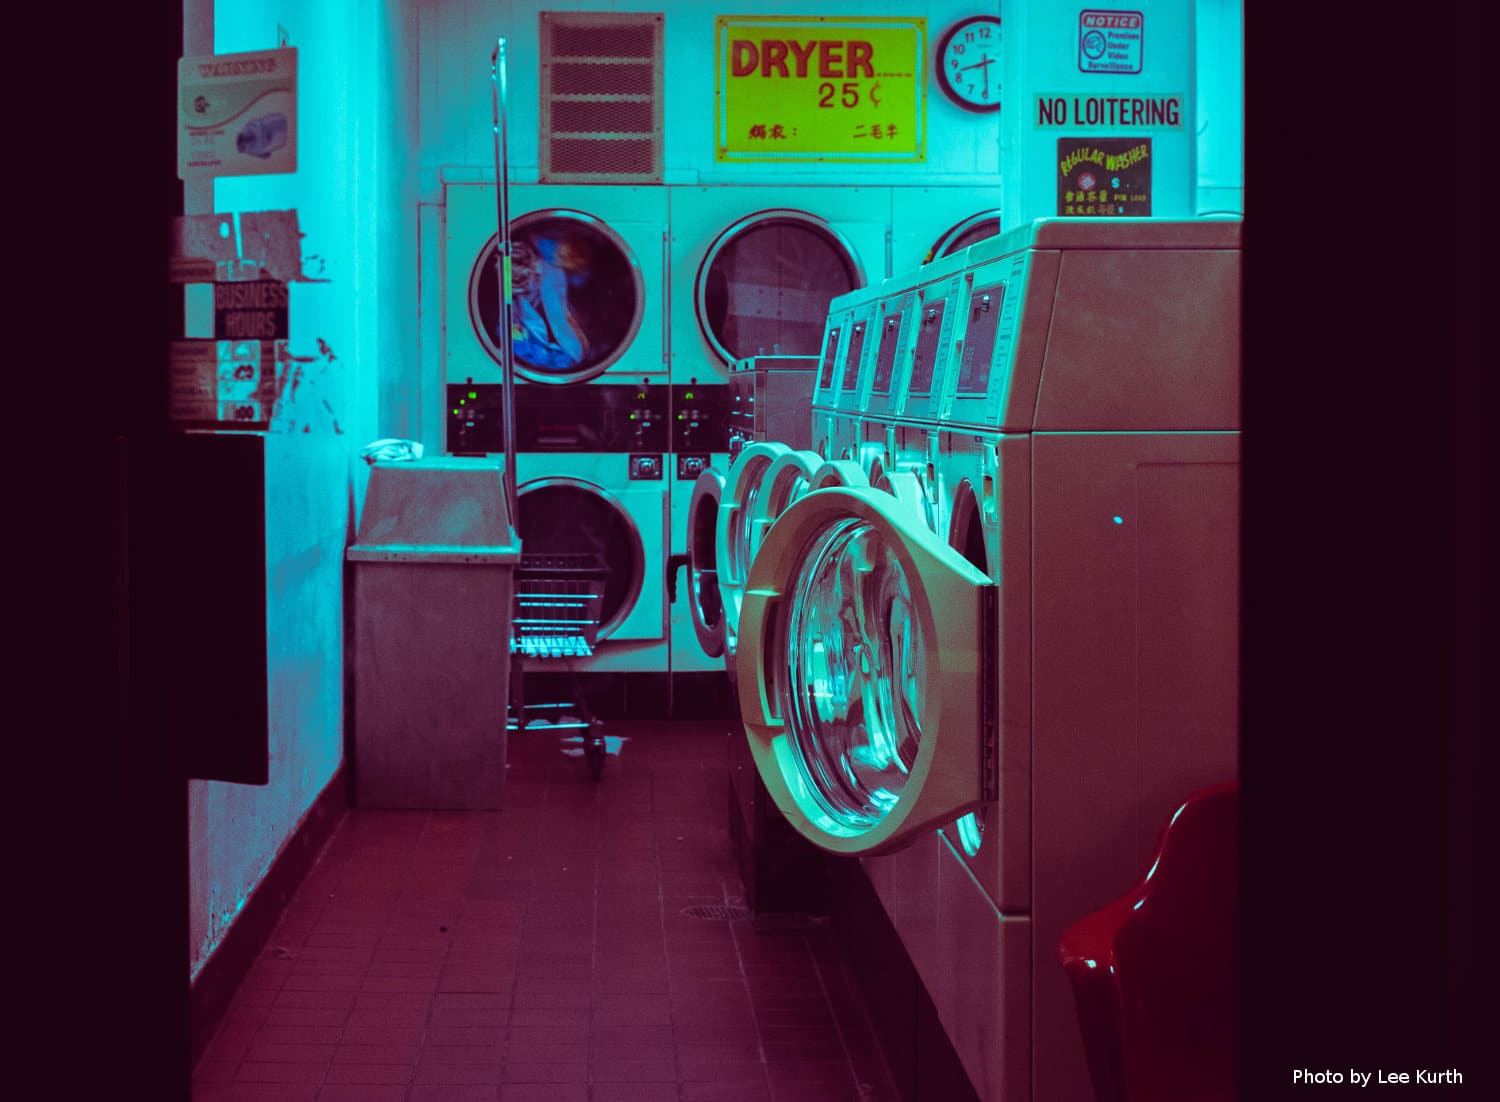 The Troika Laundromat is the latest in a long line of scams and scandals 1